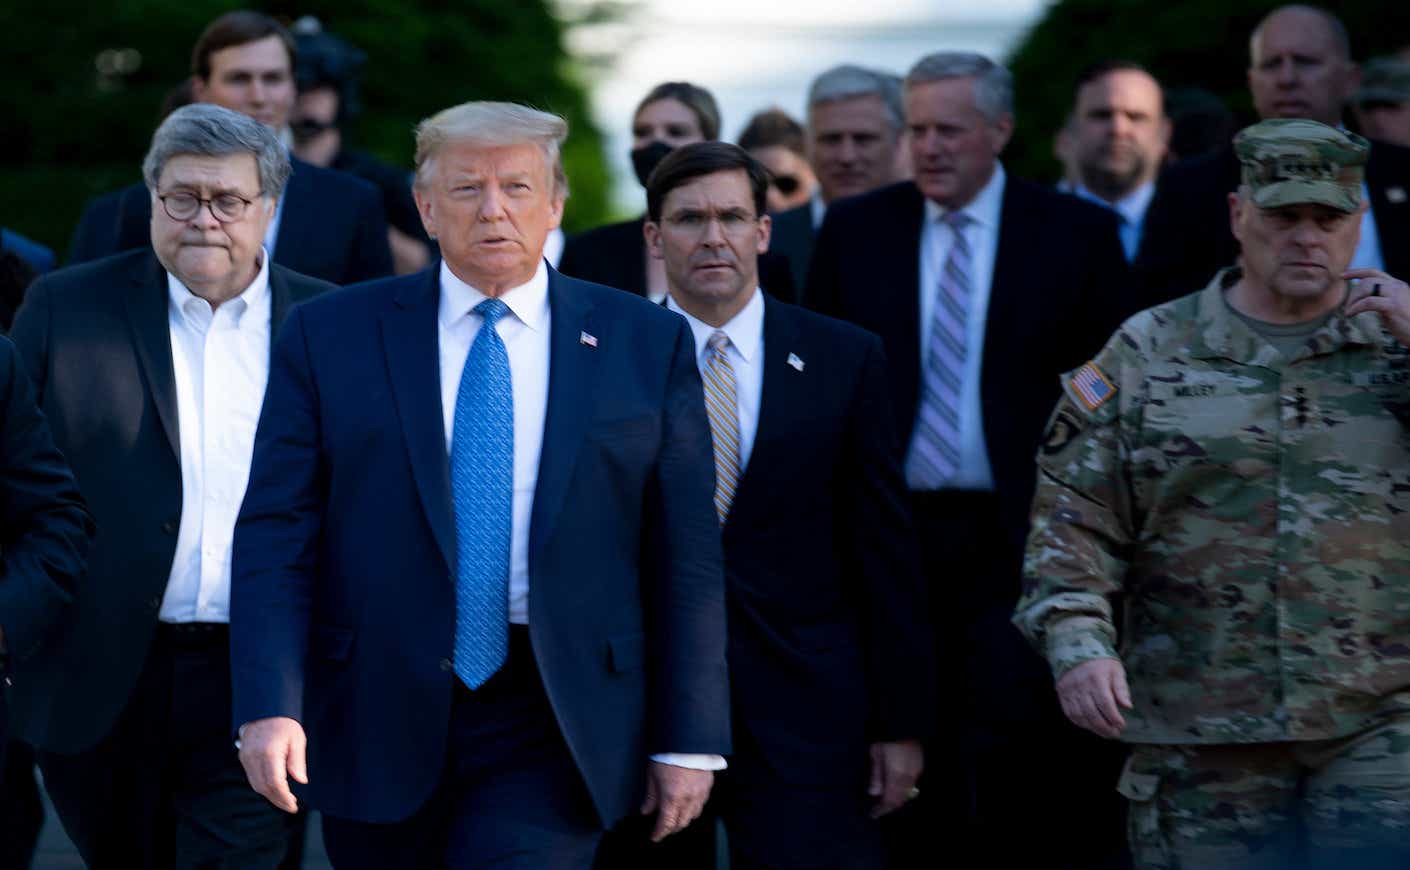 US President Donald Trump walks with US Attorney General William Barr (L), US Secretary of Defense Mark T. Esper (C), Chairman of the Joint Chiefs of Staff Mark A. Milley (R), and others from the White House to visit St. John's Church, Lafayette Square, after the area was cleared of people protesting the death of George Floyd June 1, 2020, in Washington, DC.